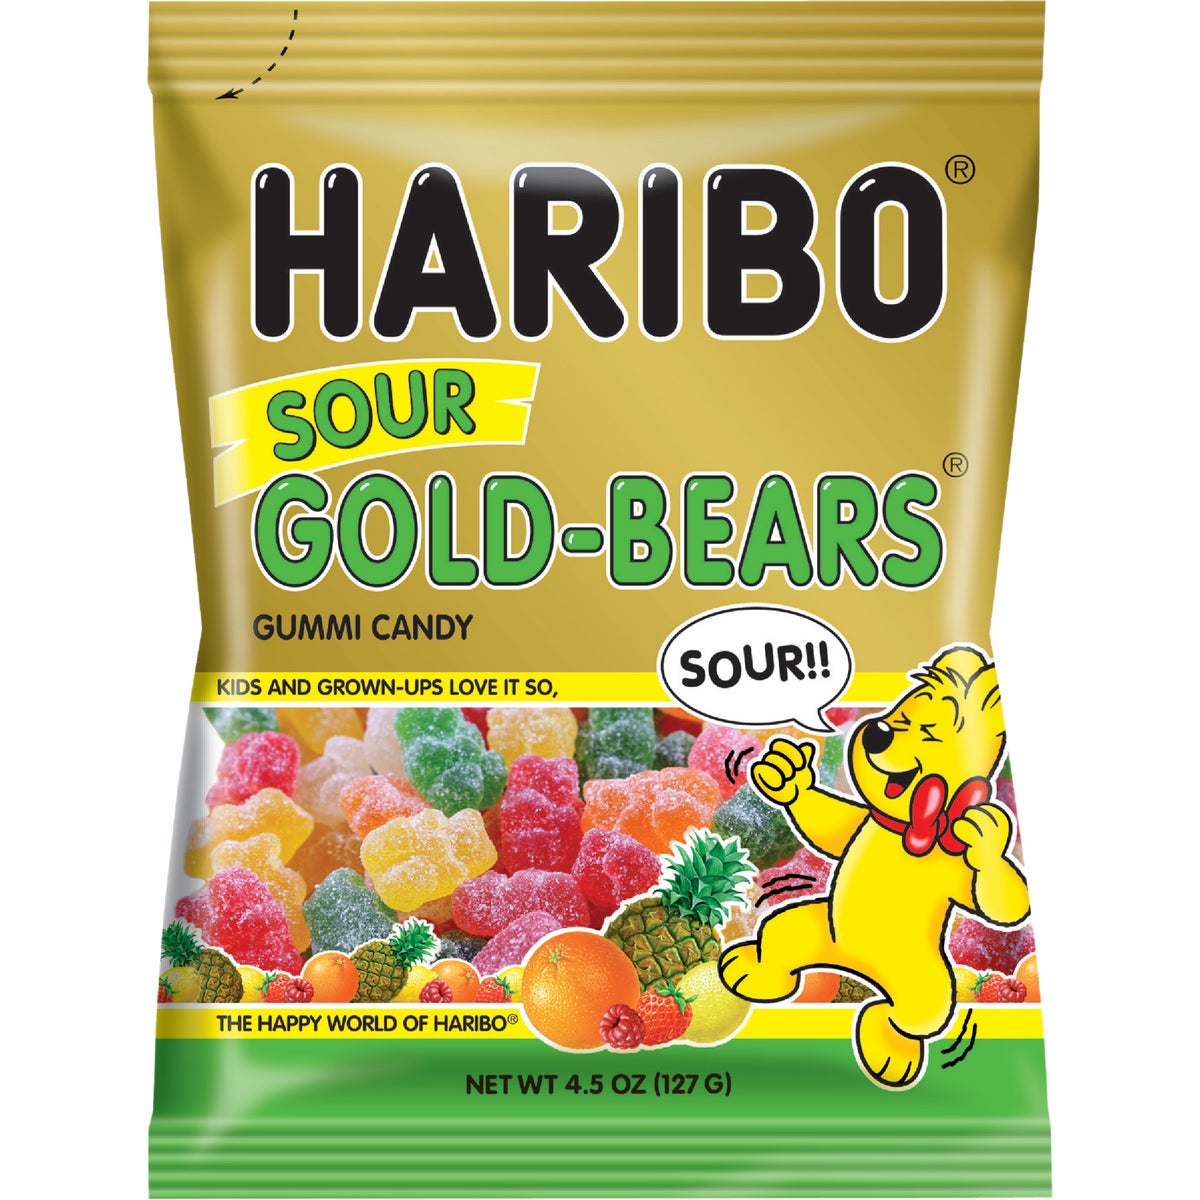 Gold-Bears Haribo 117340 Haribo Gold-Bears Assorted Sour Fruit Flavor 4.5 Oz. Candy 117340 Pack of 12